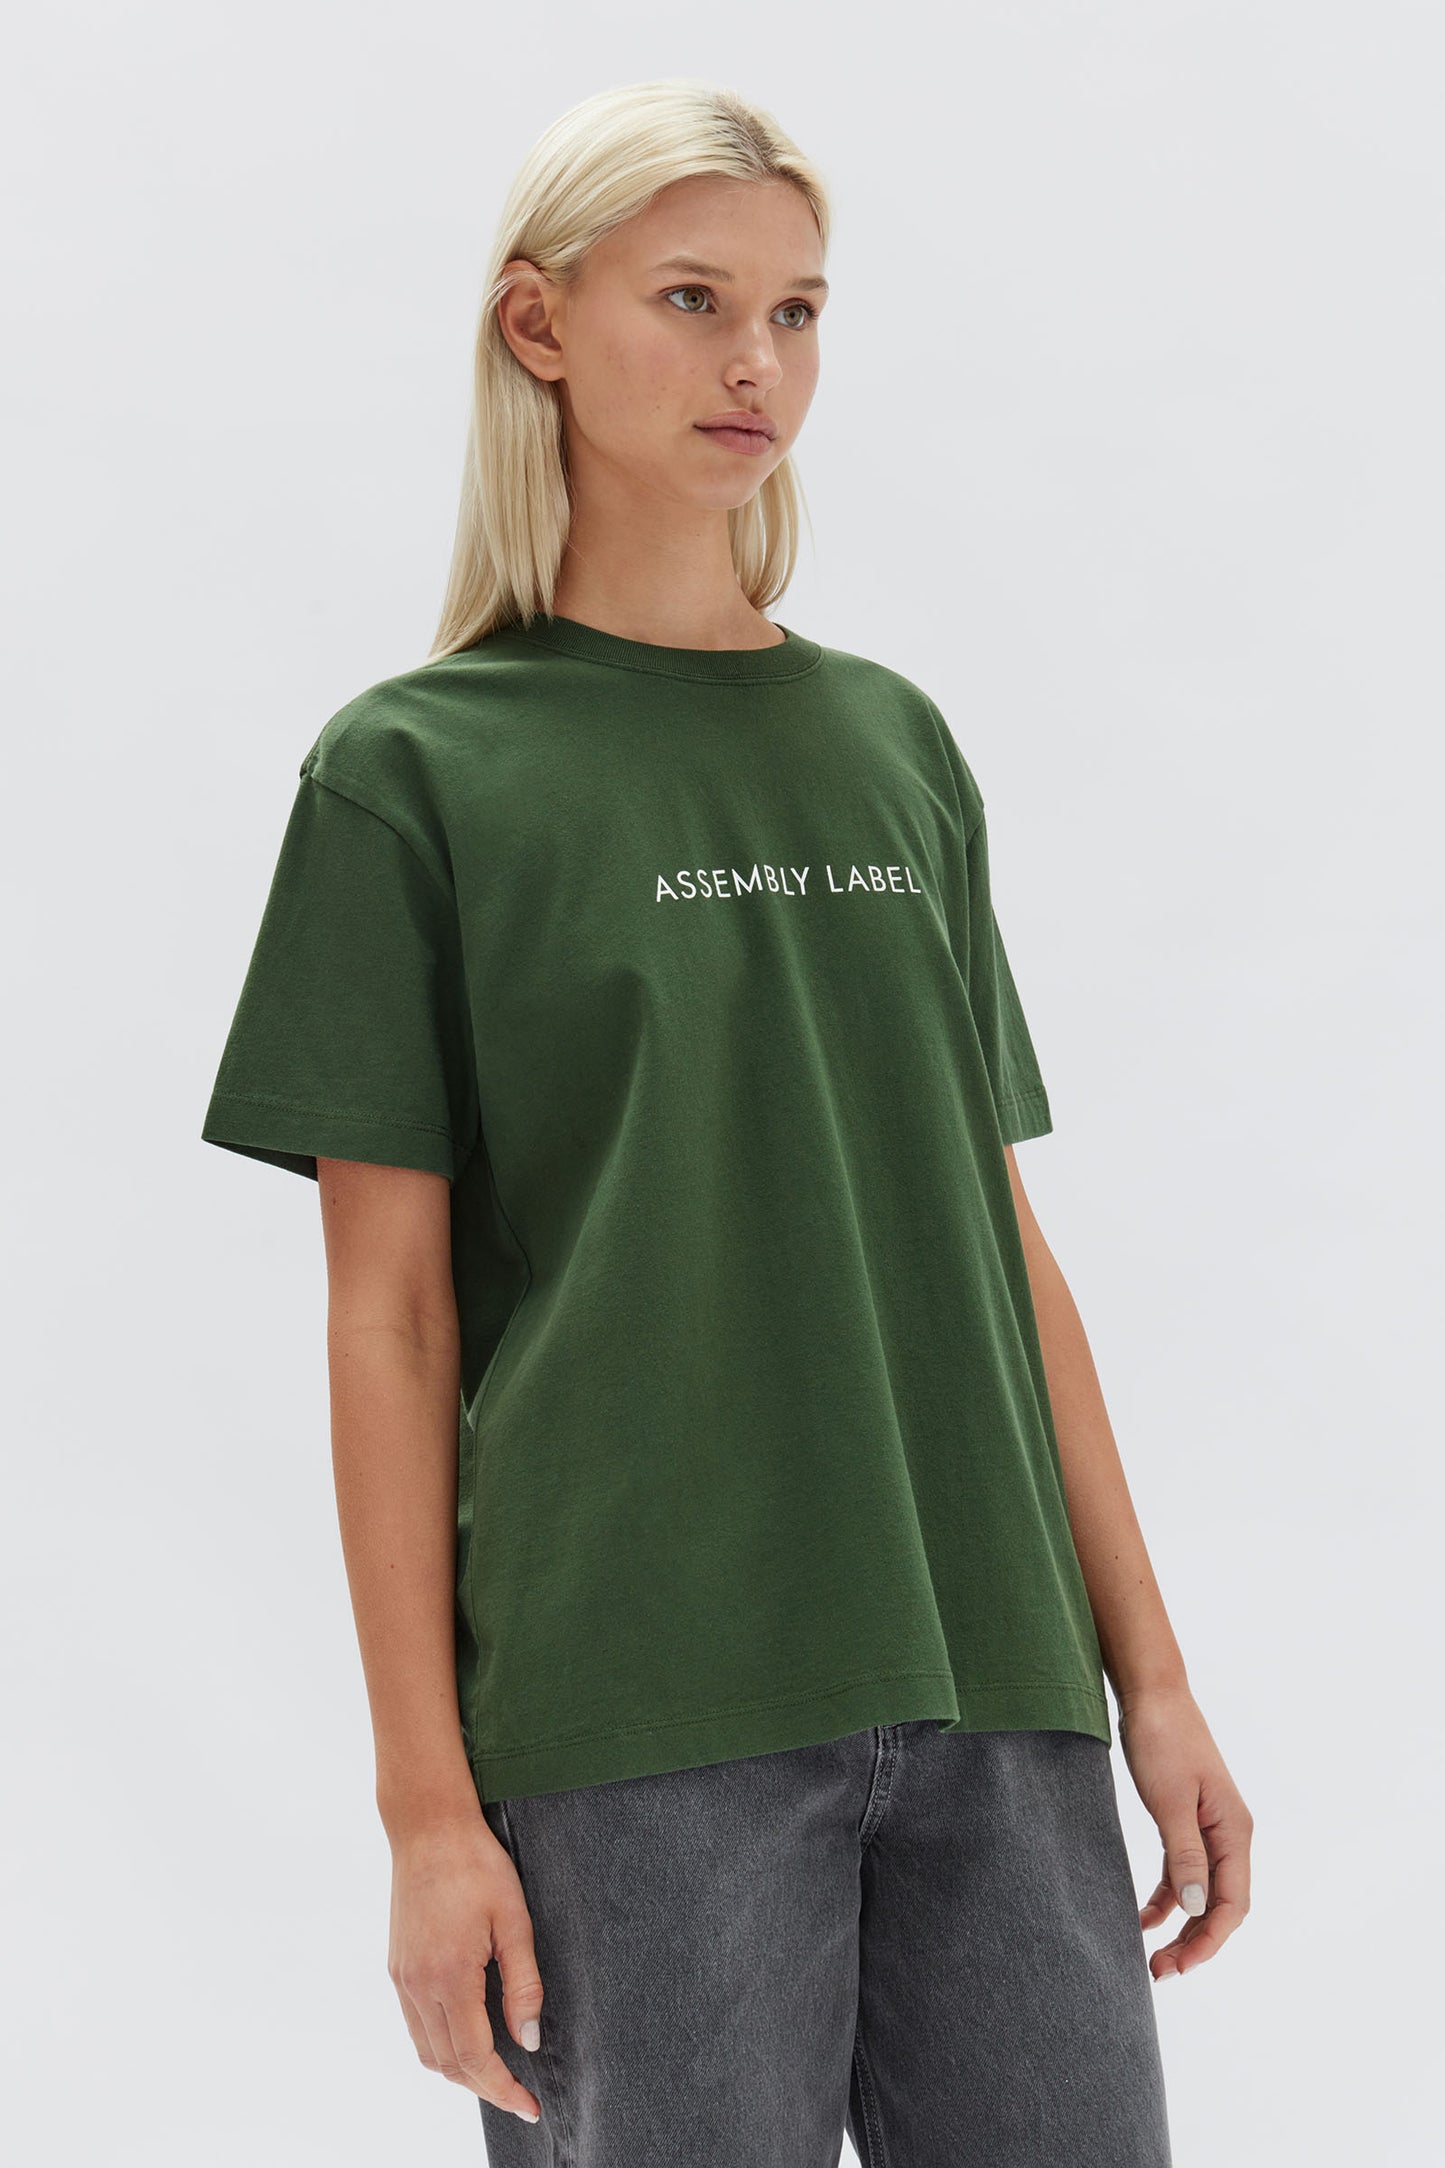 ASSEMBLY LABEL // Everyday Organic Logo Tee FOREST